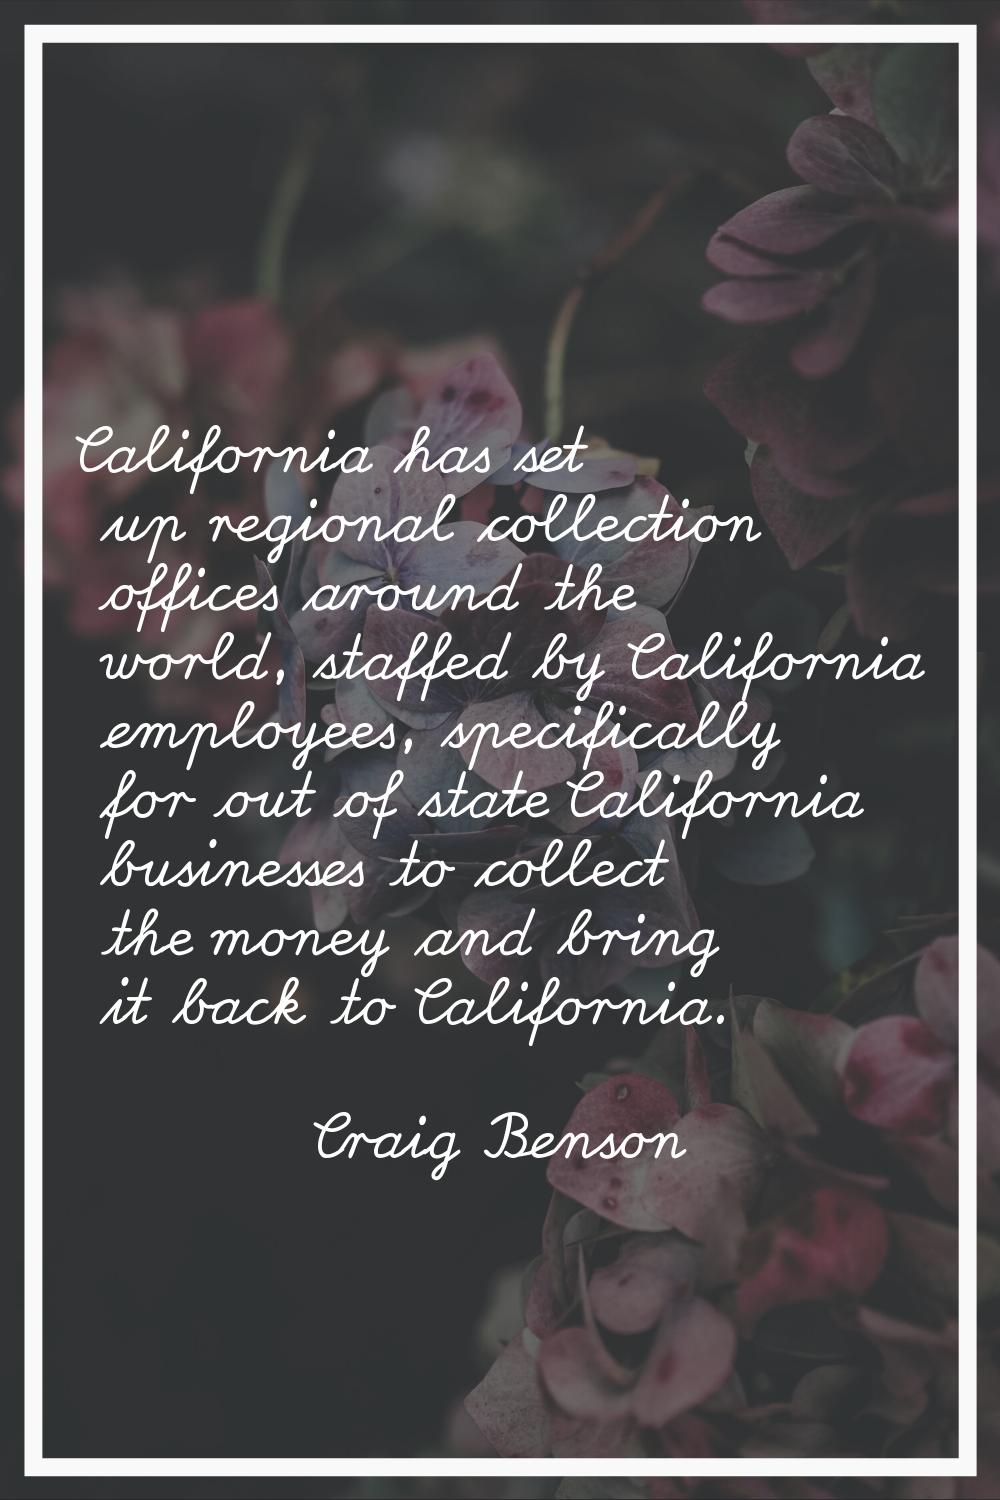 California has set up regional collection offices around the world, staffed by California employees